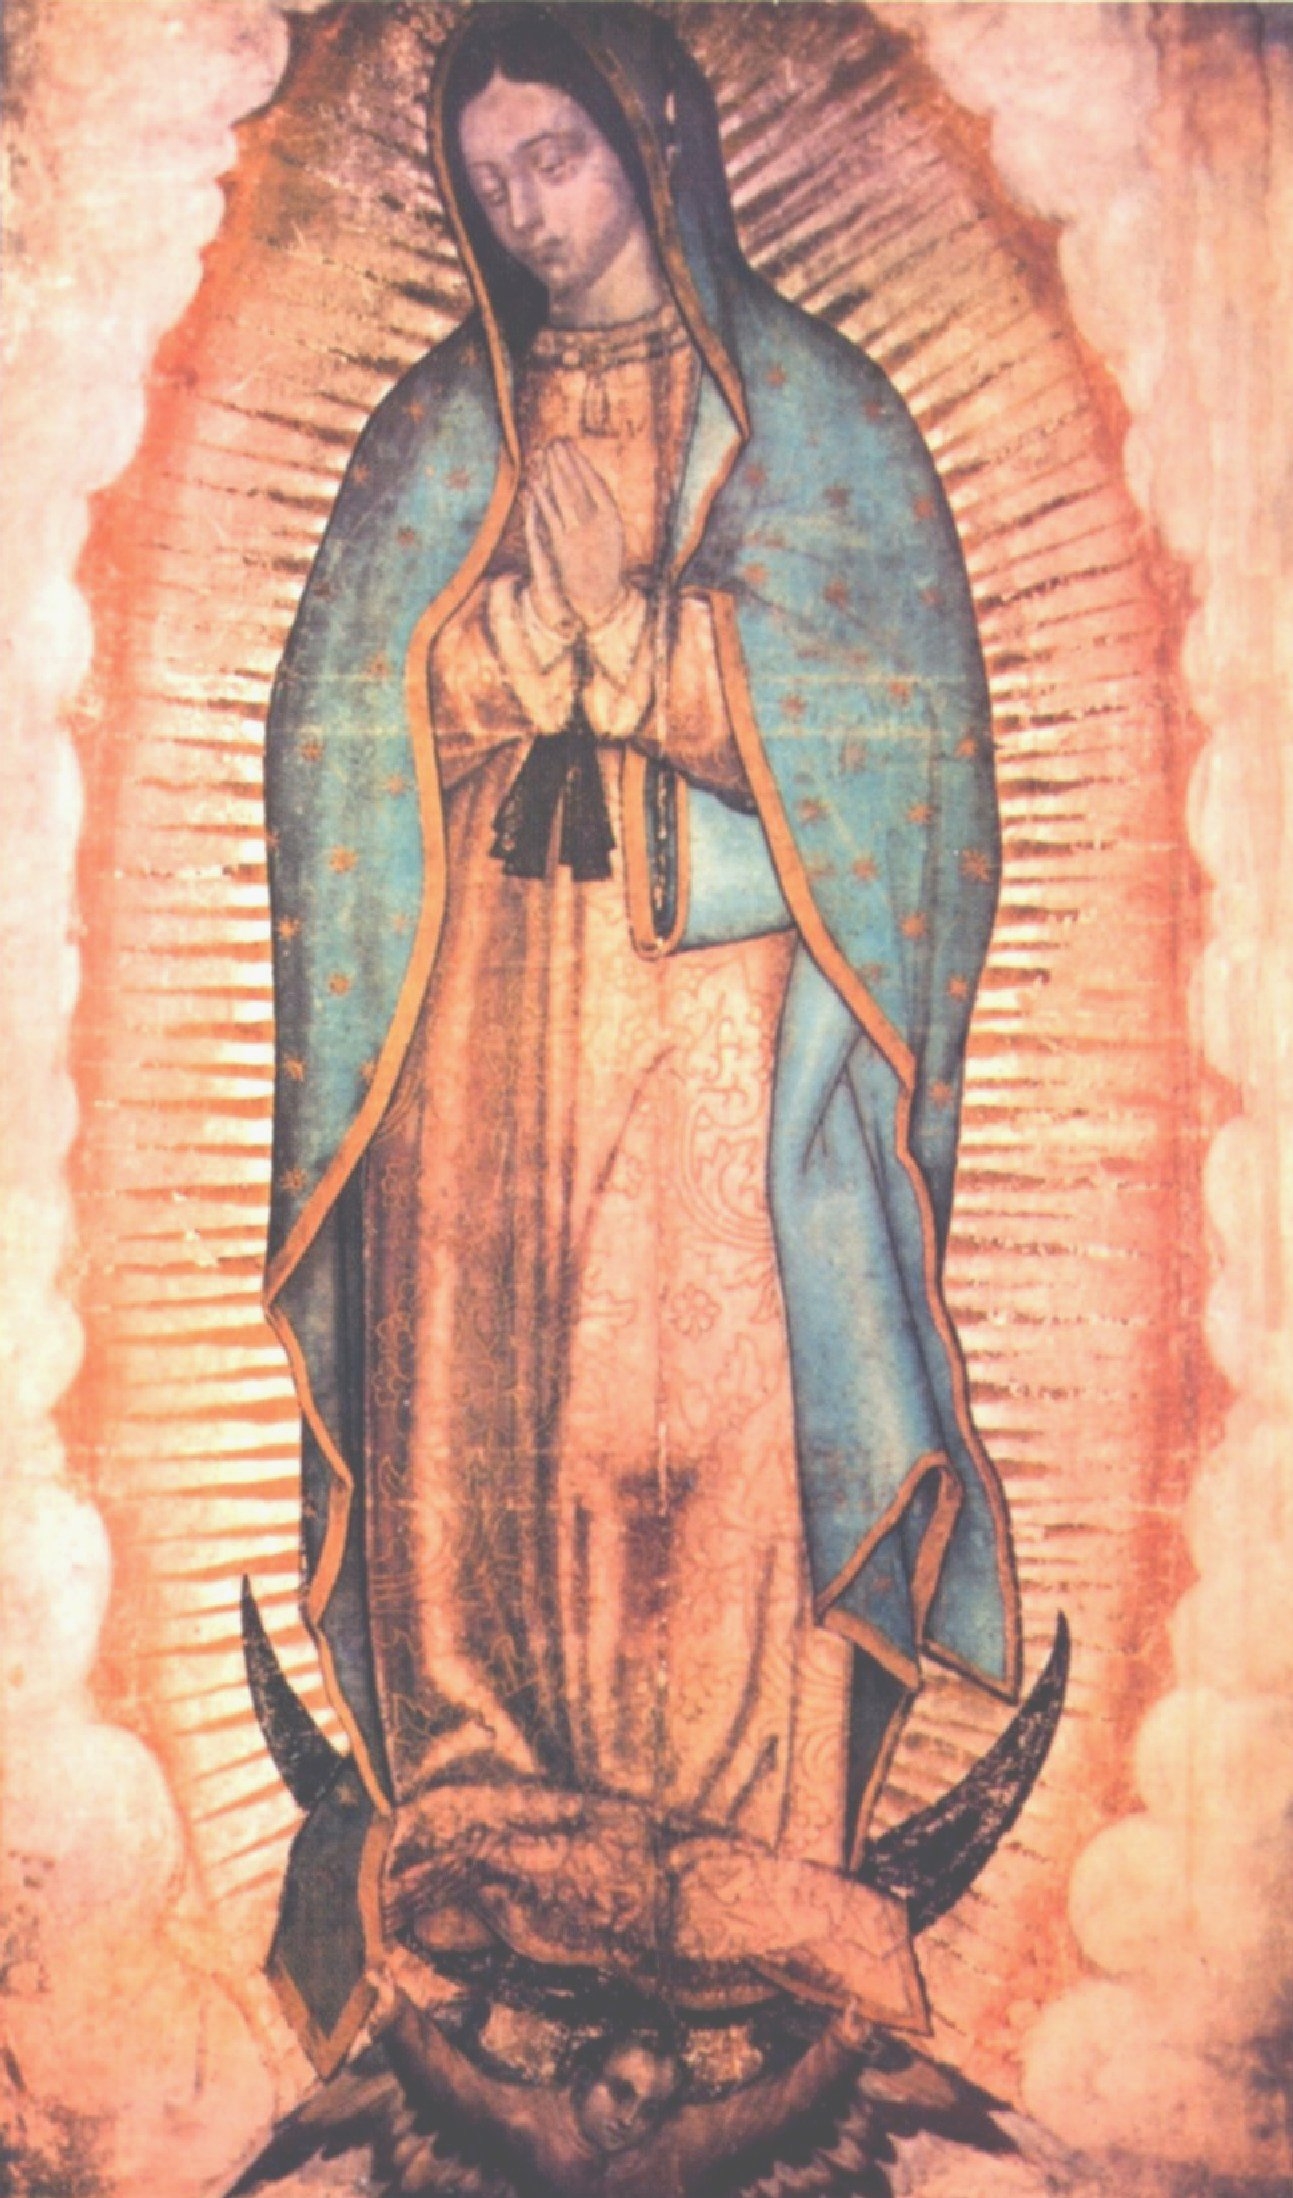 Tilma of Guadalupe (1531 AC)